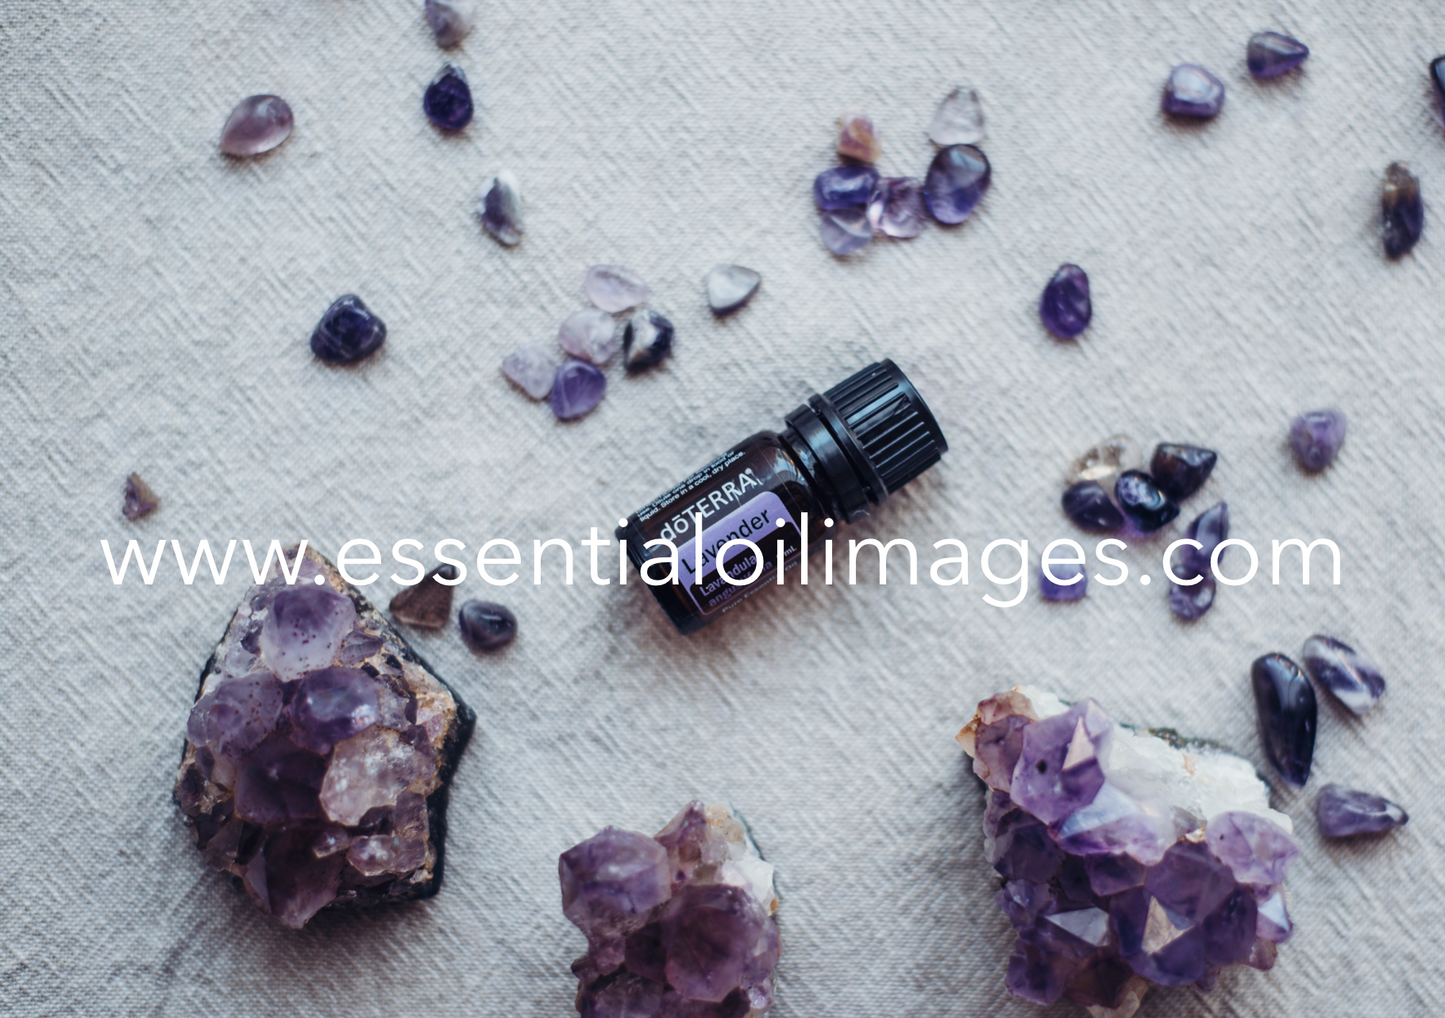 The Lavender Crystal Collection